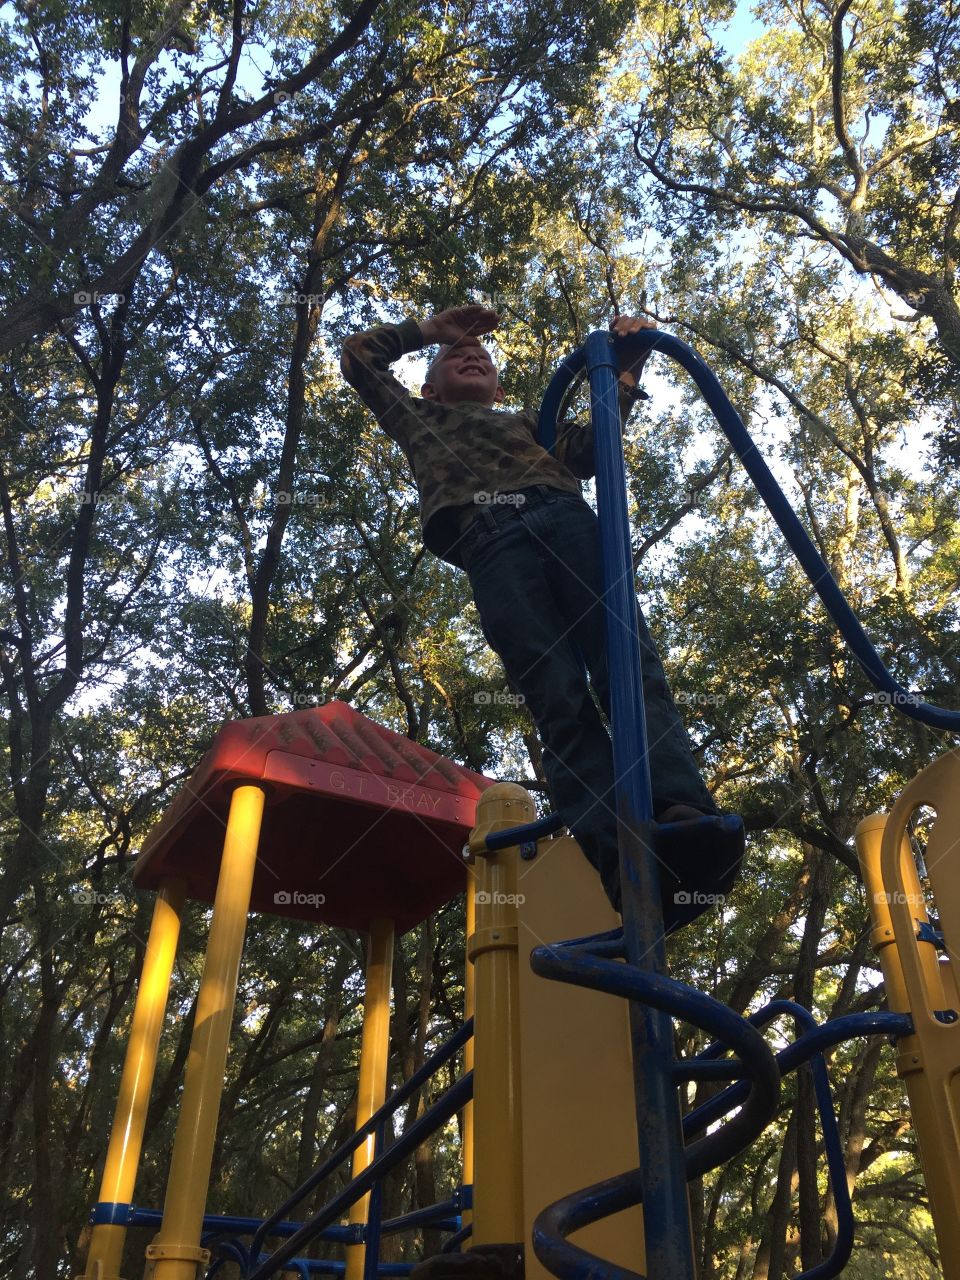 Playground Lookout 